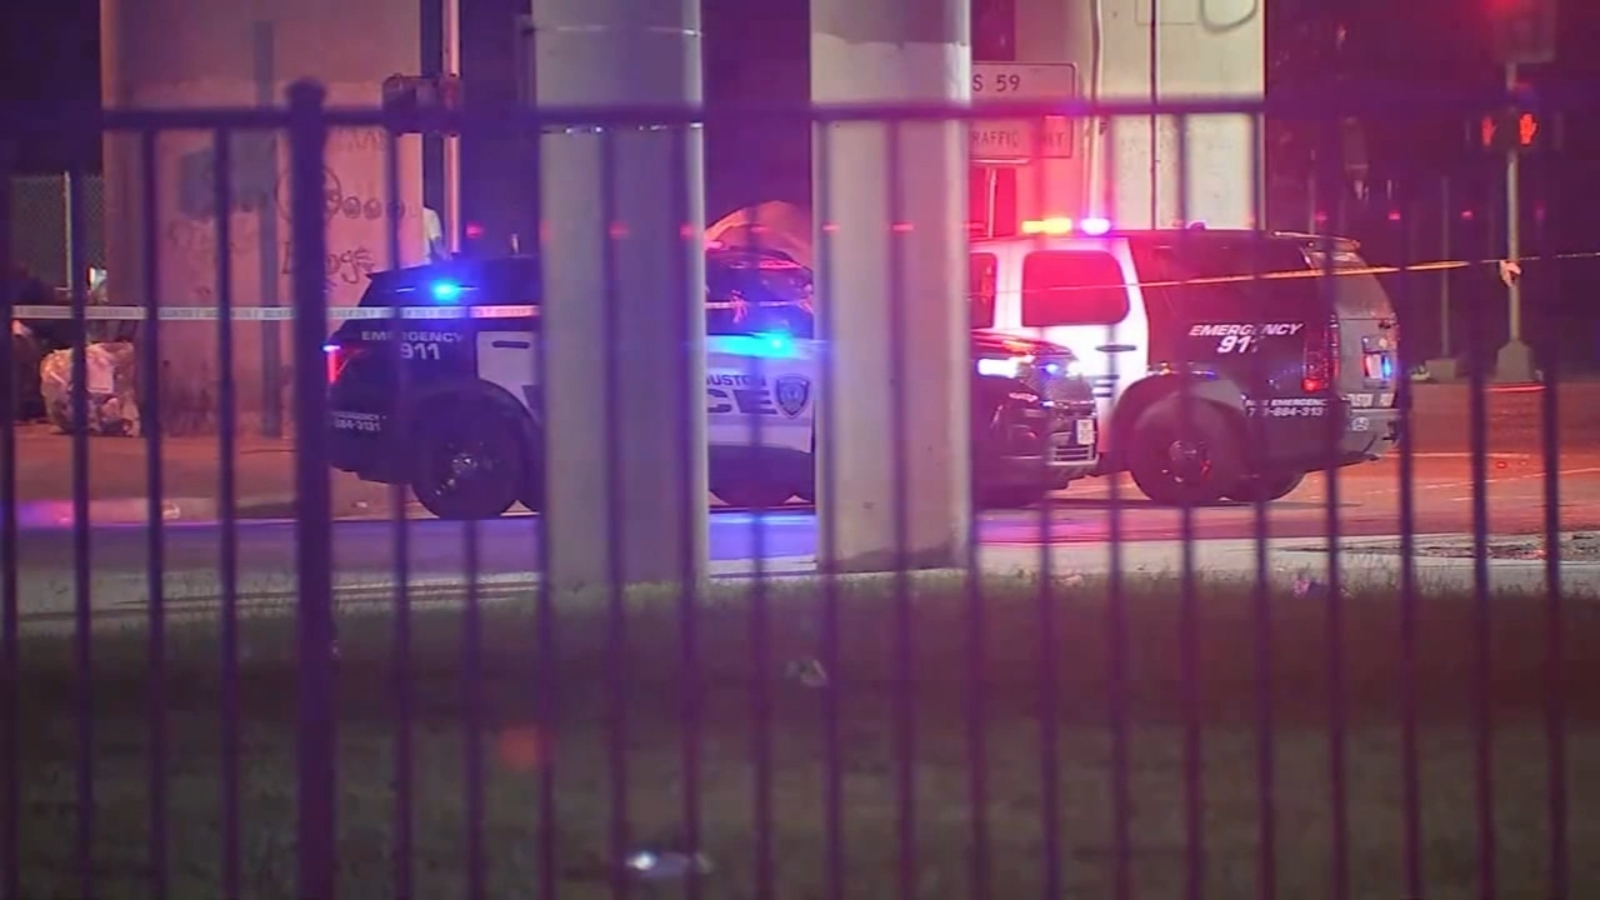 Museum District hit-and-run: 1 pedestrian killed, 2 injured when driver crashes into crowd on Fannin Street, Houston police say [Video]